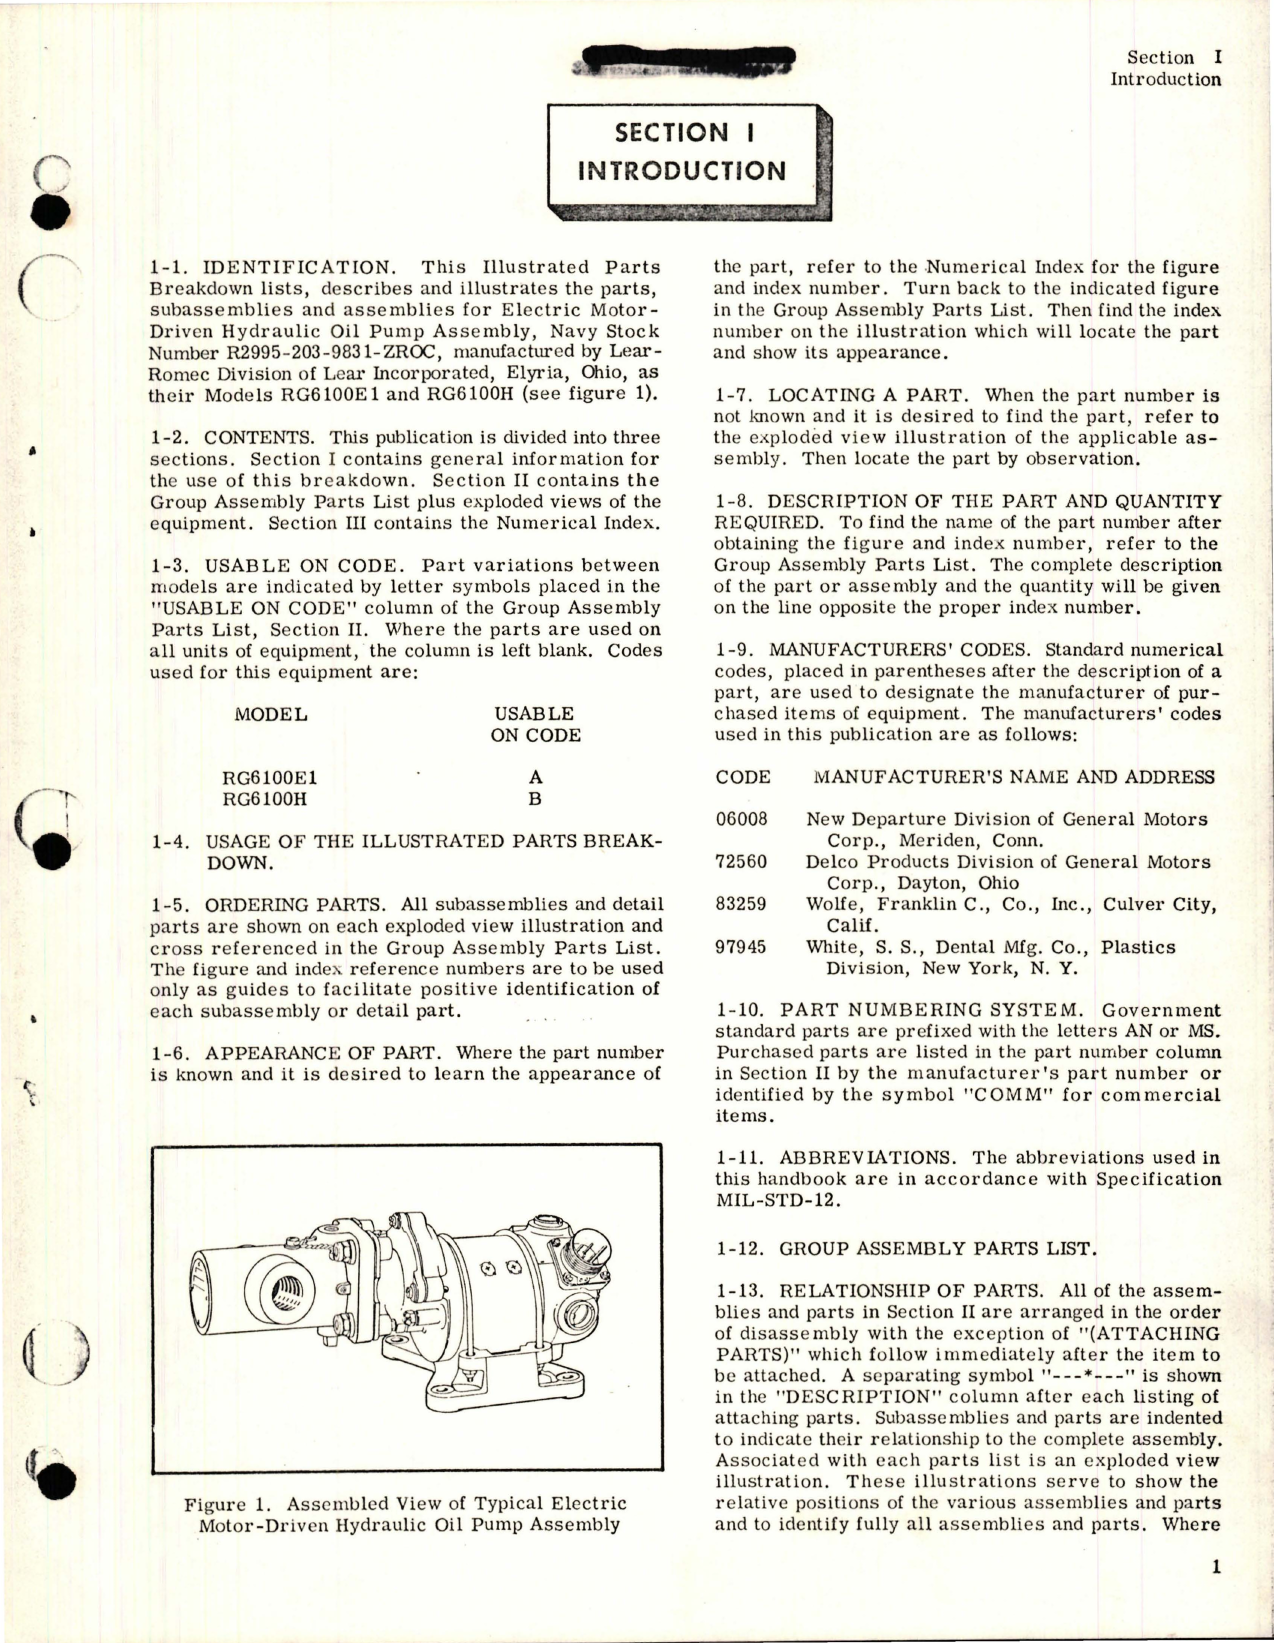 Sample page 5 from AirCorps Library document: Illustrated Parts Breakdown for Electric Motor Driven Hydraulic Oil Pump Assembly - Parts RG6100E1 and RG6100H 